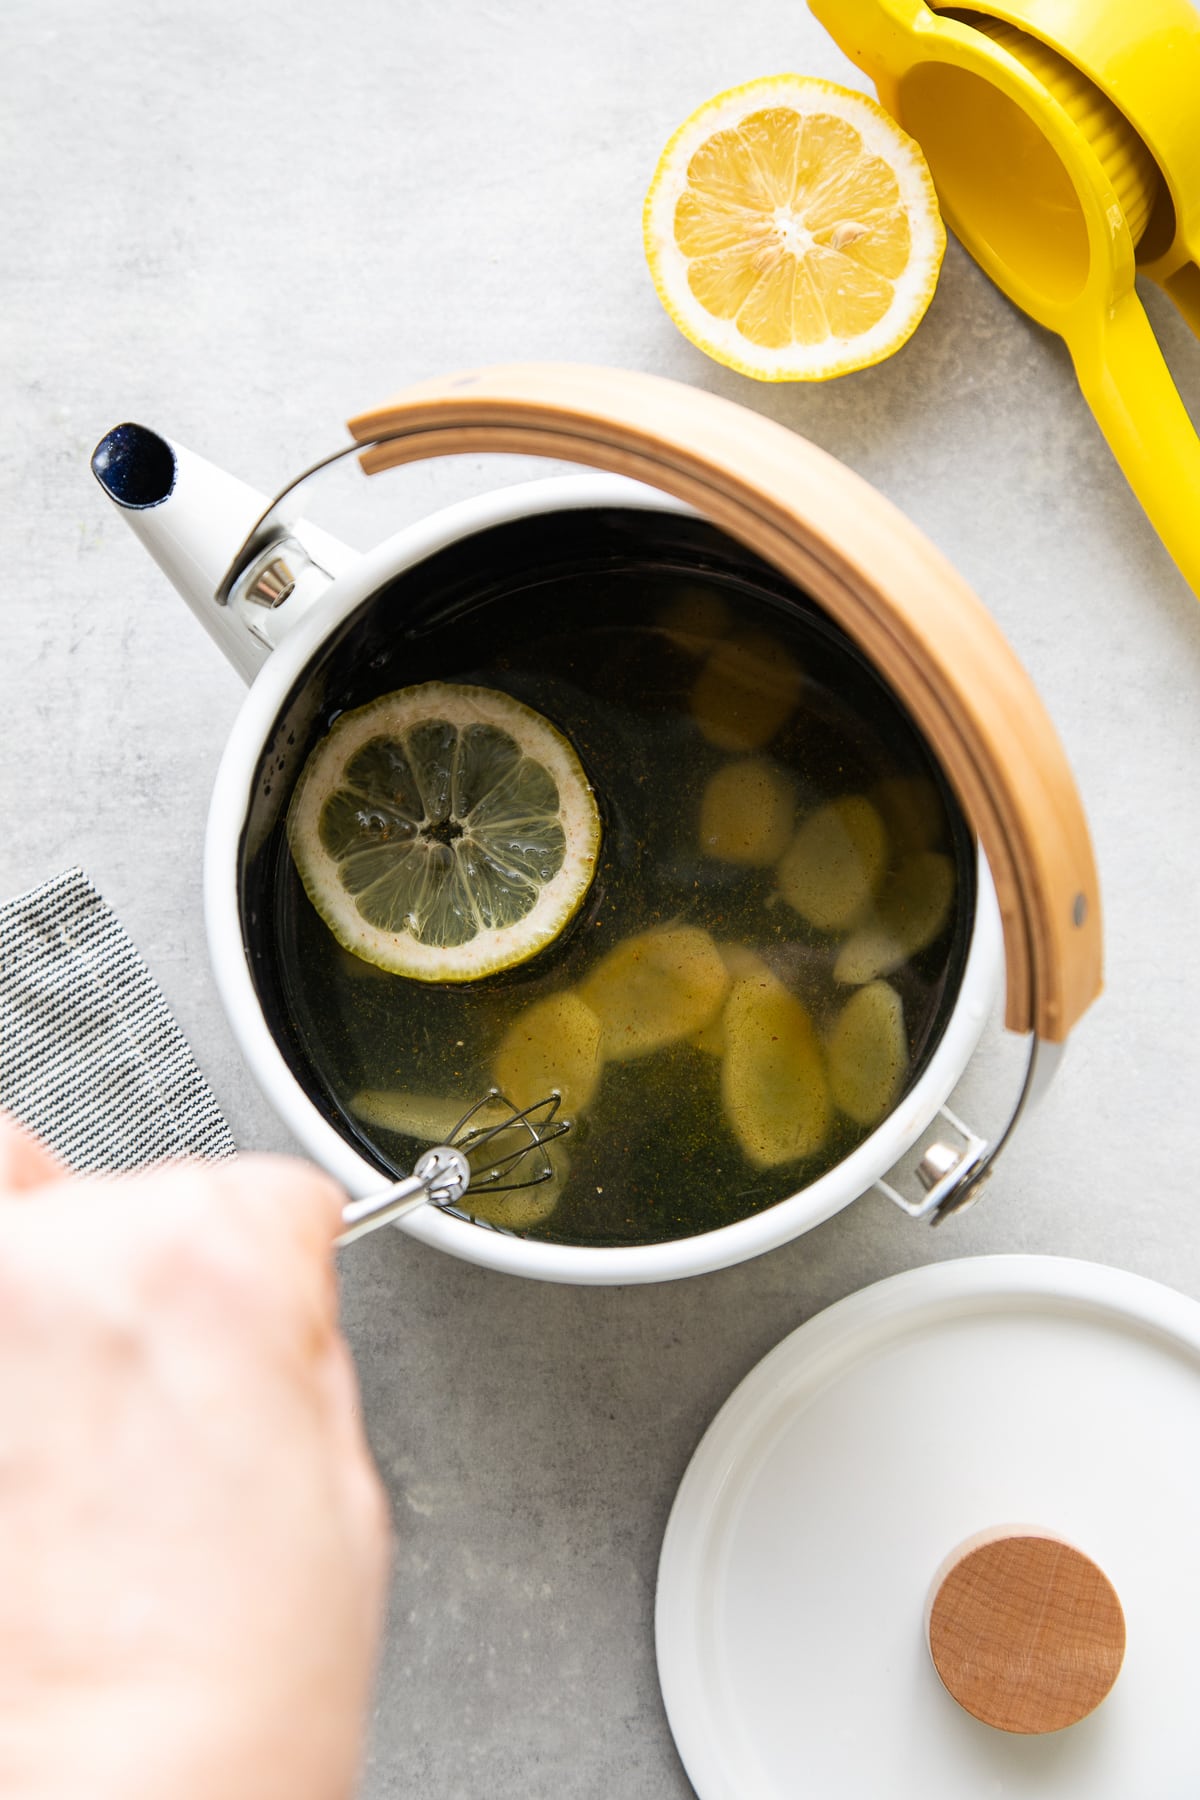 From top to bottom, see the process of making lemon ginger tea, which is good for health.